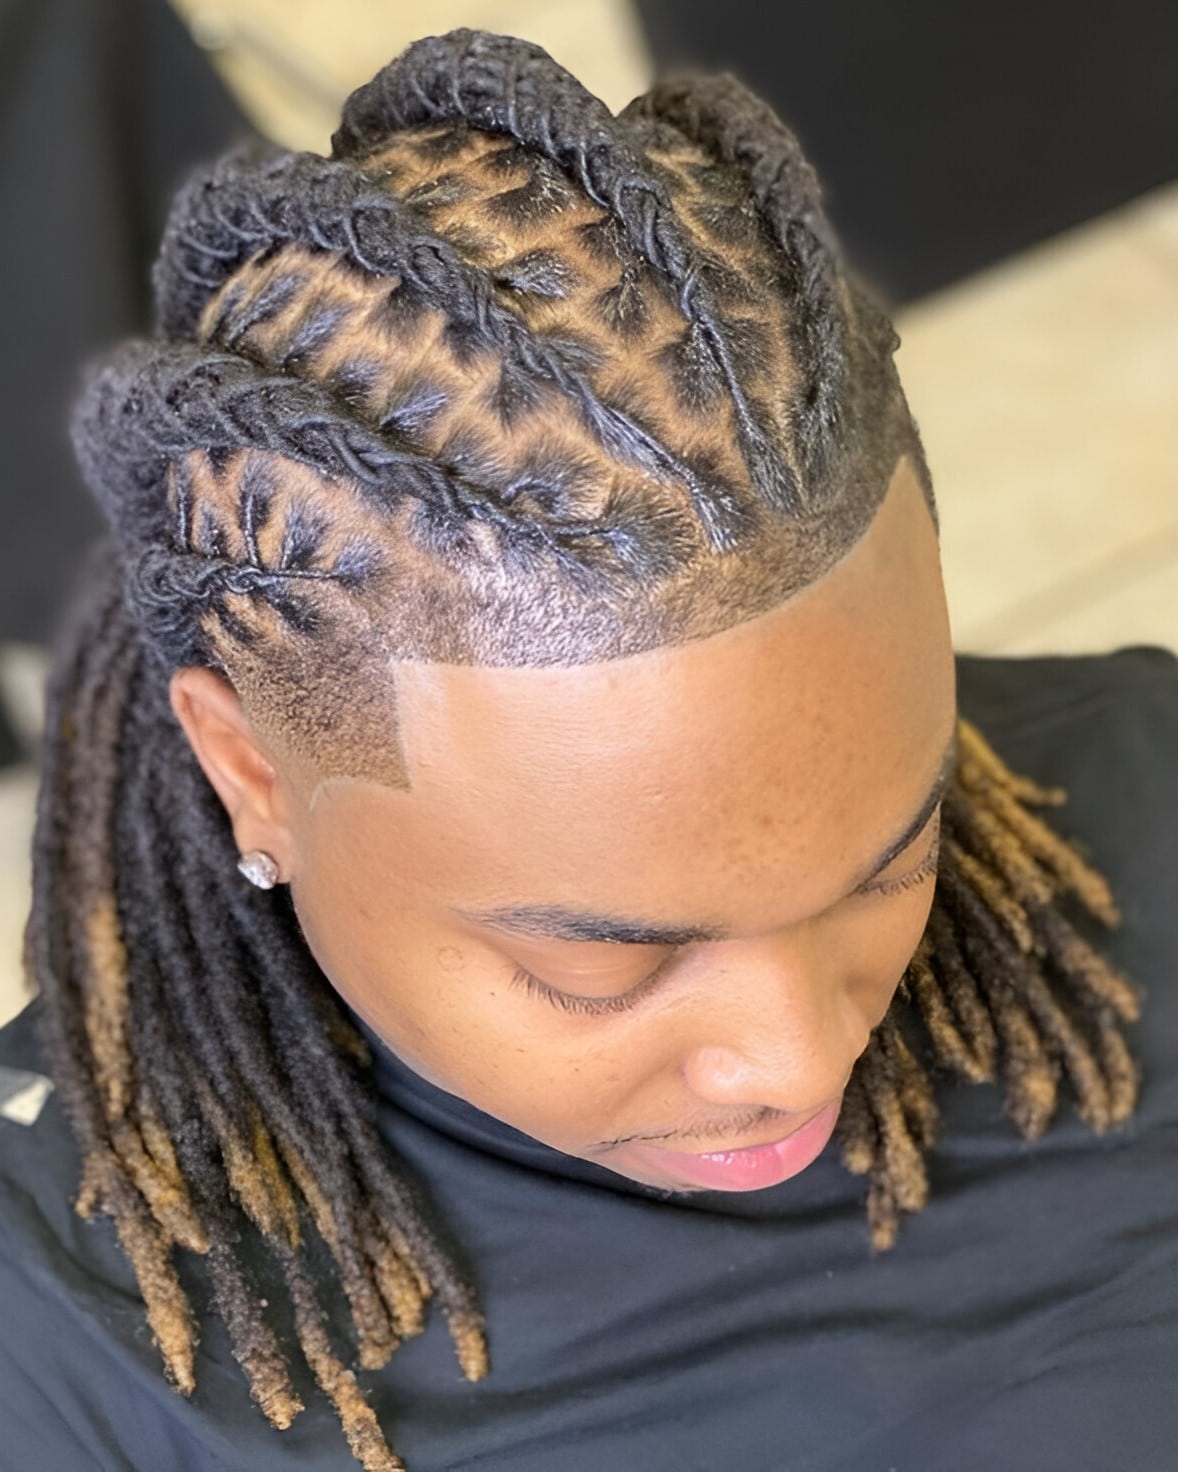 Image of Barrel Twists With Taper Fade Cut inspired by Barrel Twist Hairstyles